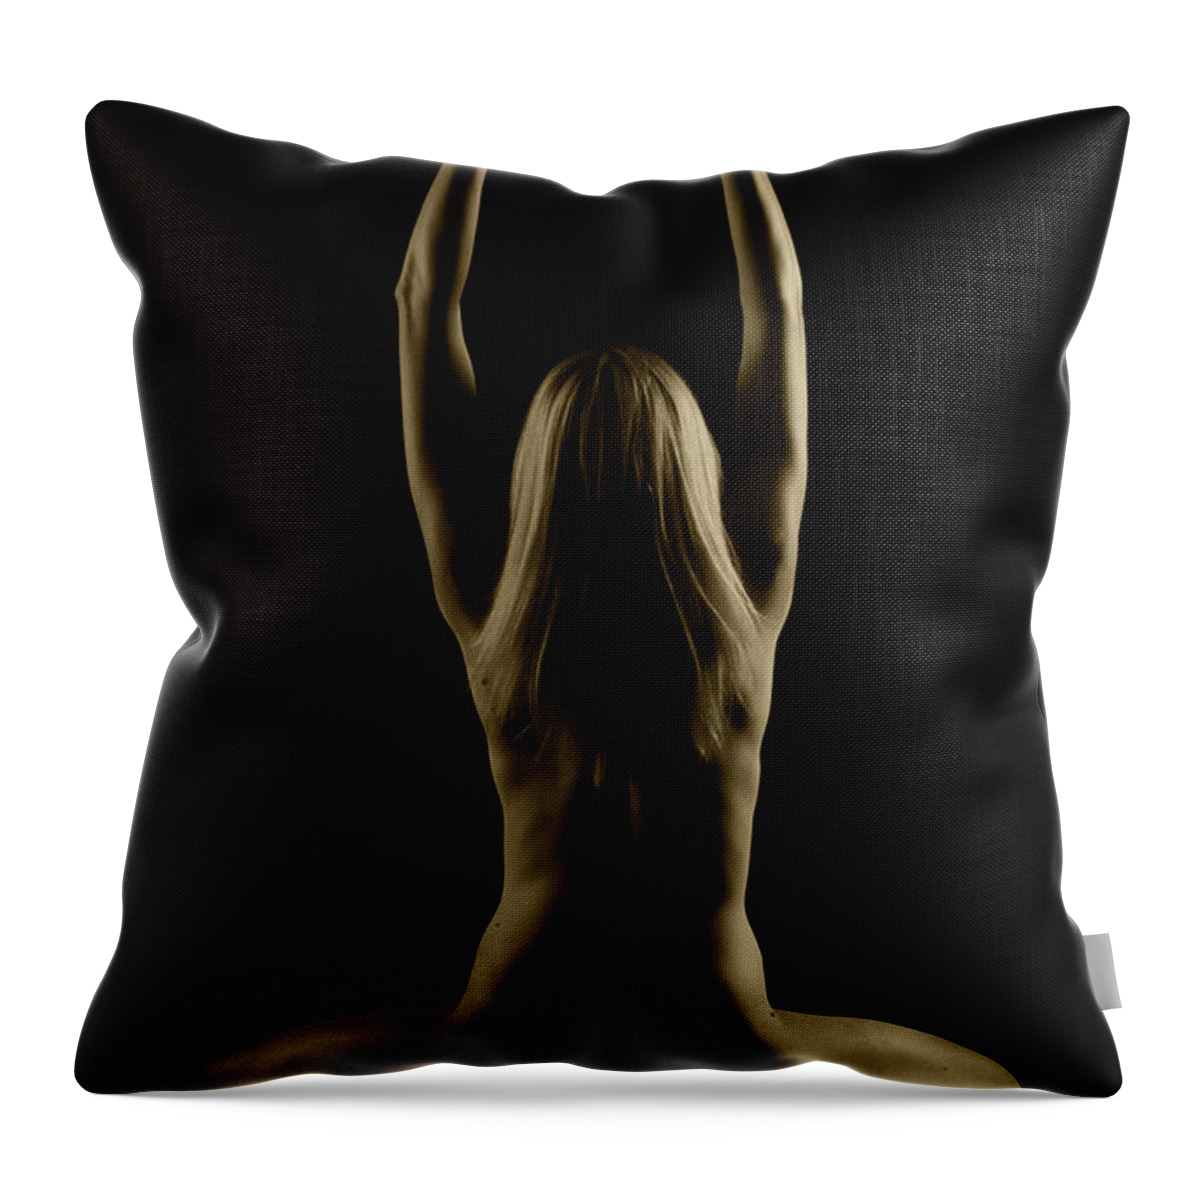 Artistic Photographs Throw Pillow featuring the photograph Pick me up by Robert WK Clark